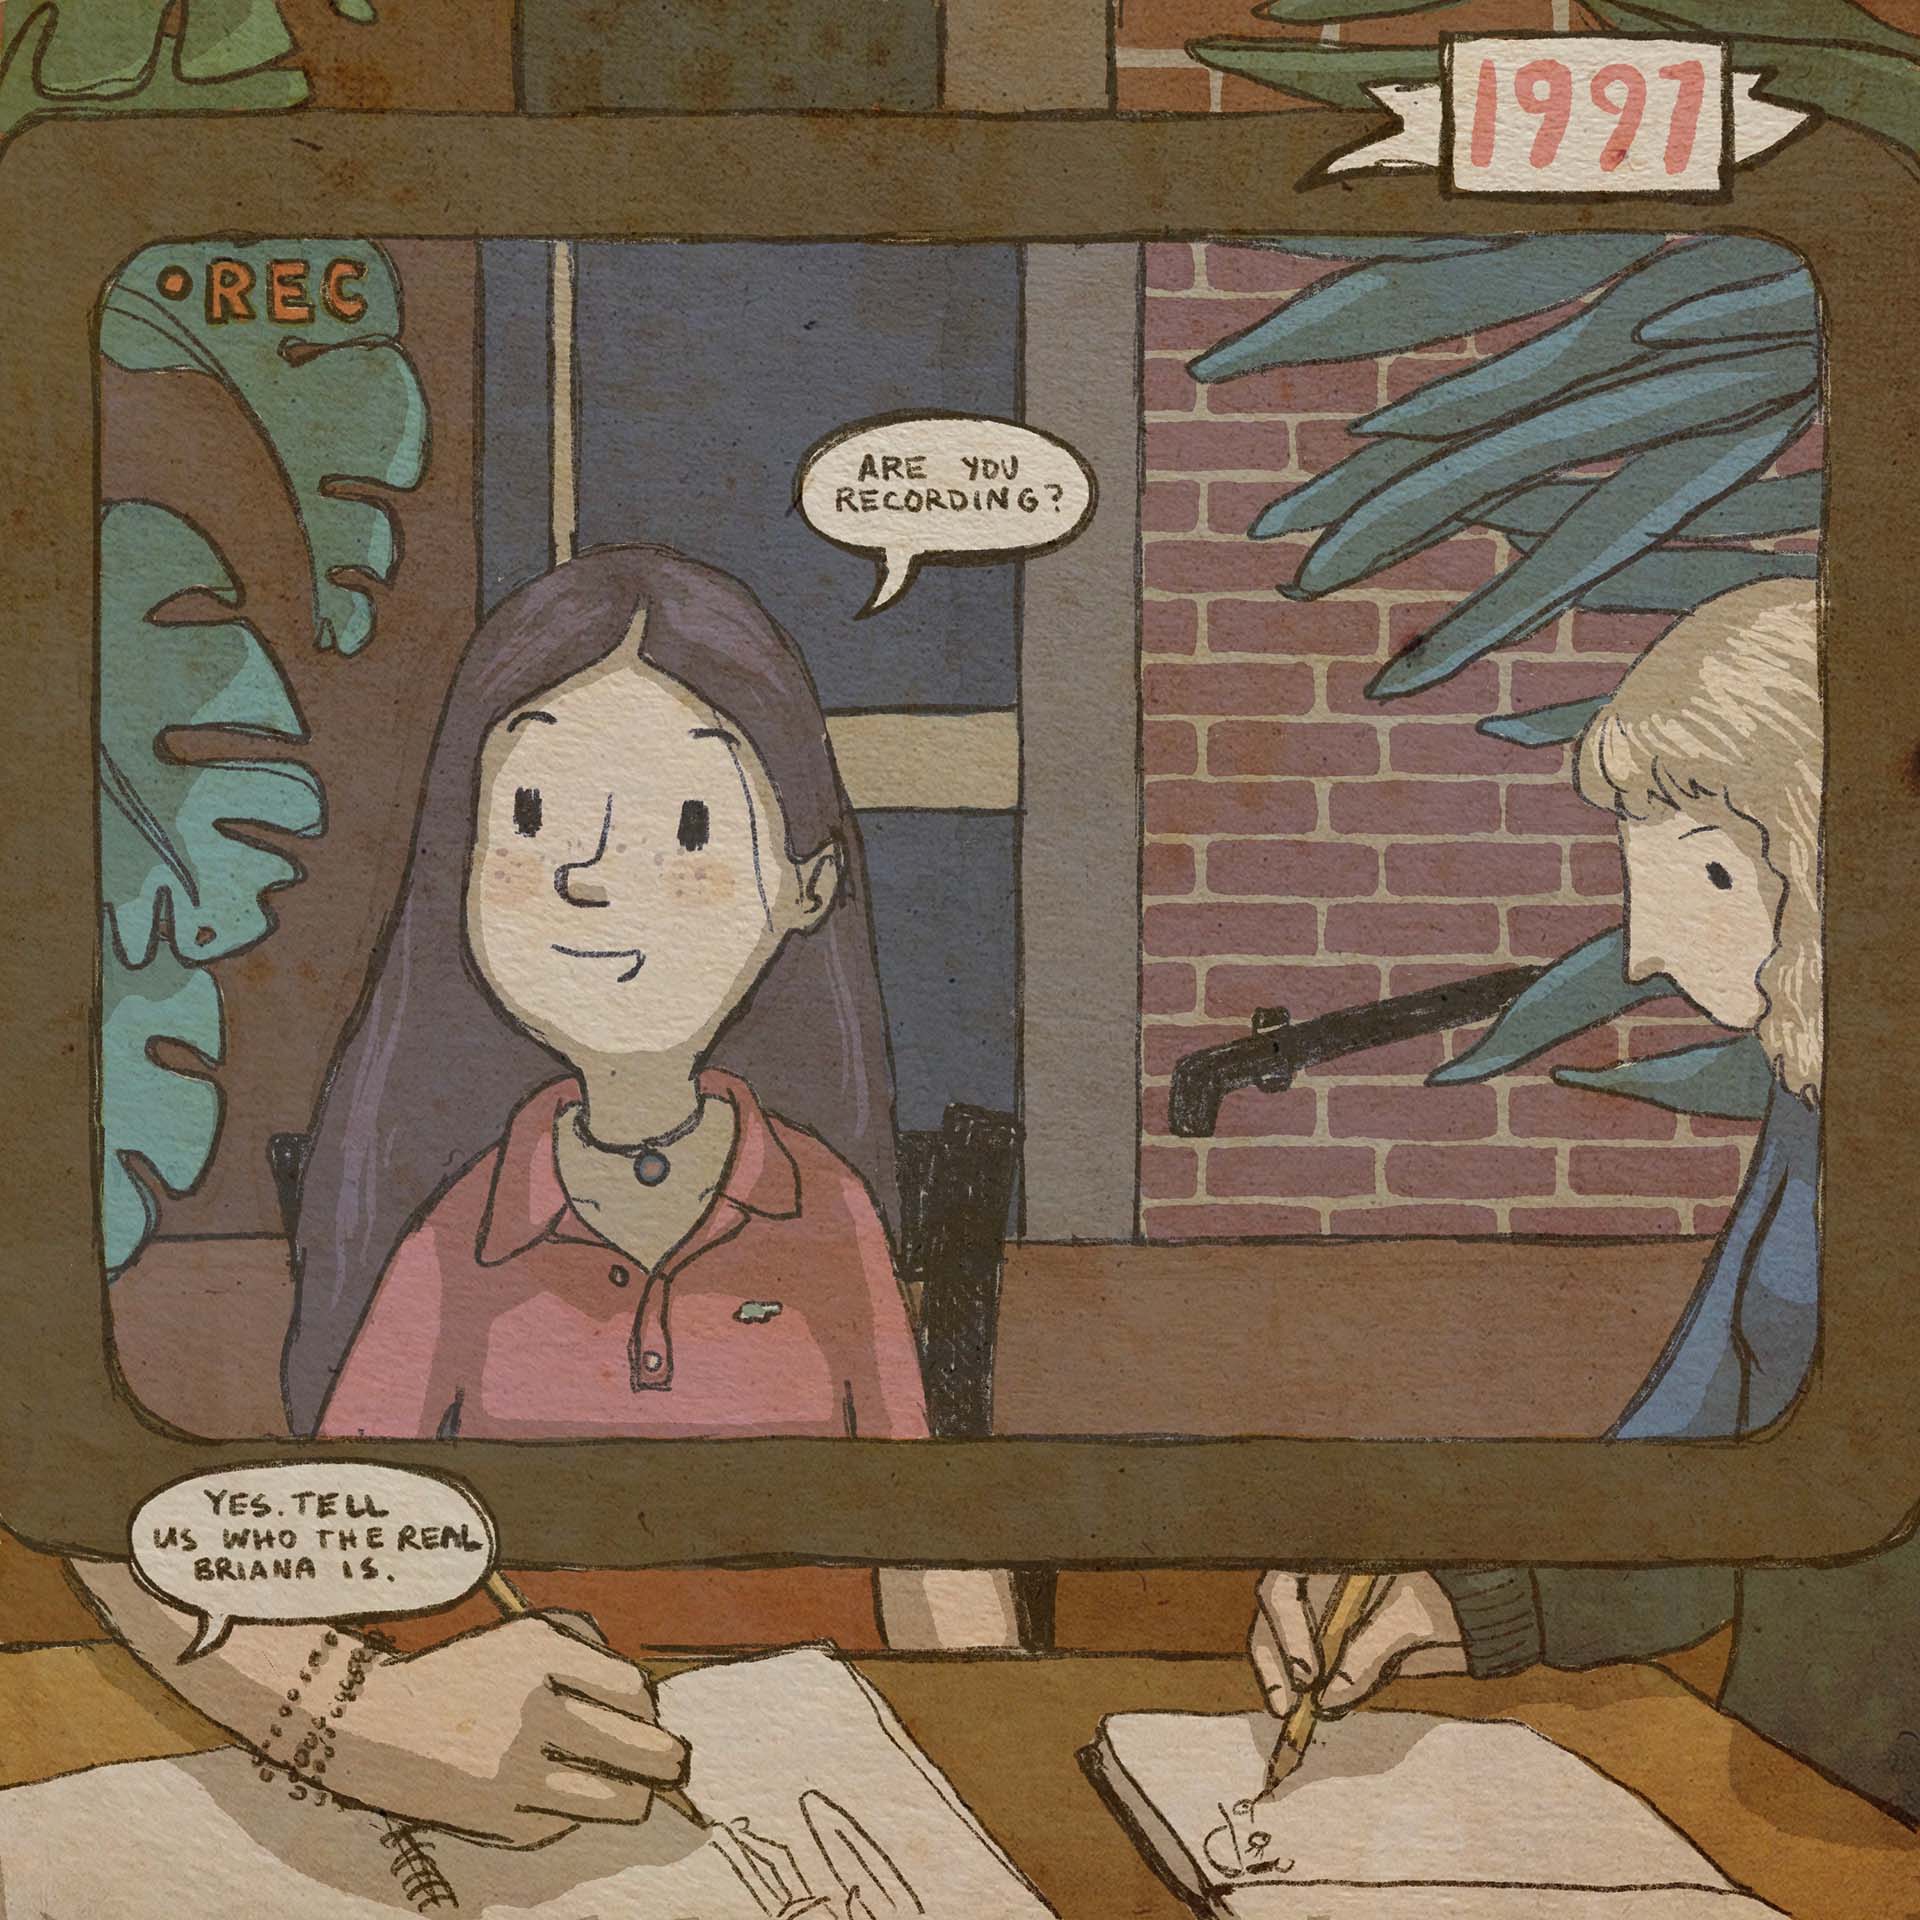 In this illustrated comic panel (labeled "1997"), we seen two teenage girls — a brunette and a blonde — through the viewfinder of a camcorder. The two girls are drawing in their sketchbooks. "Are you recording?" asks the brown-haired girl. "Yes. Tell us who the real Briana is," says the person holding the camcorder.